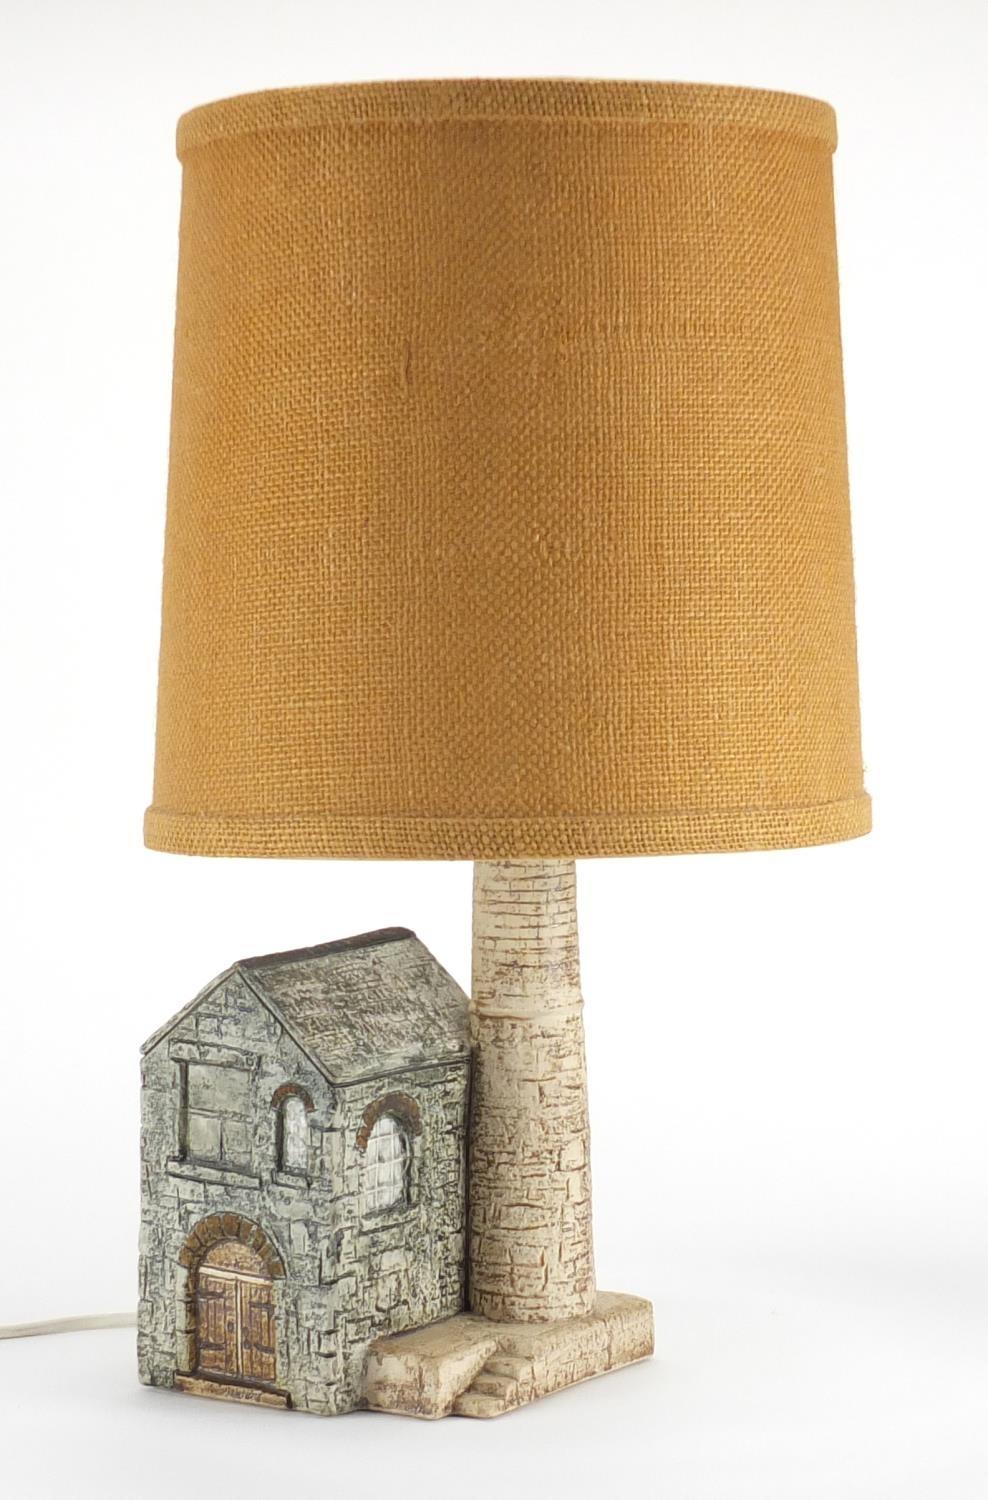 Troika St Ives pottery tin mine lamp with shade, hand painted and incised by Alison Brigden, painted